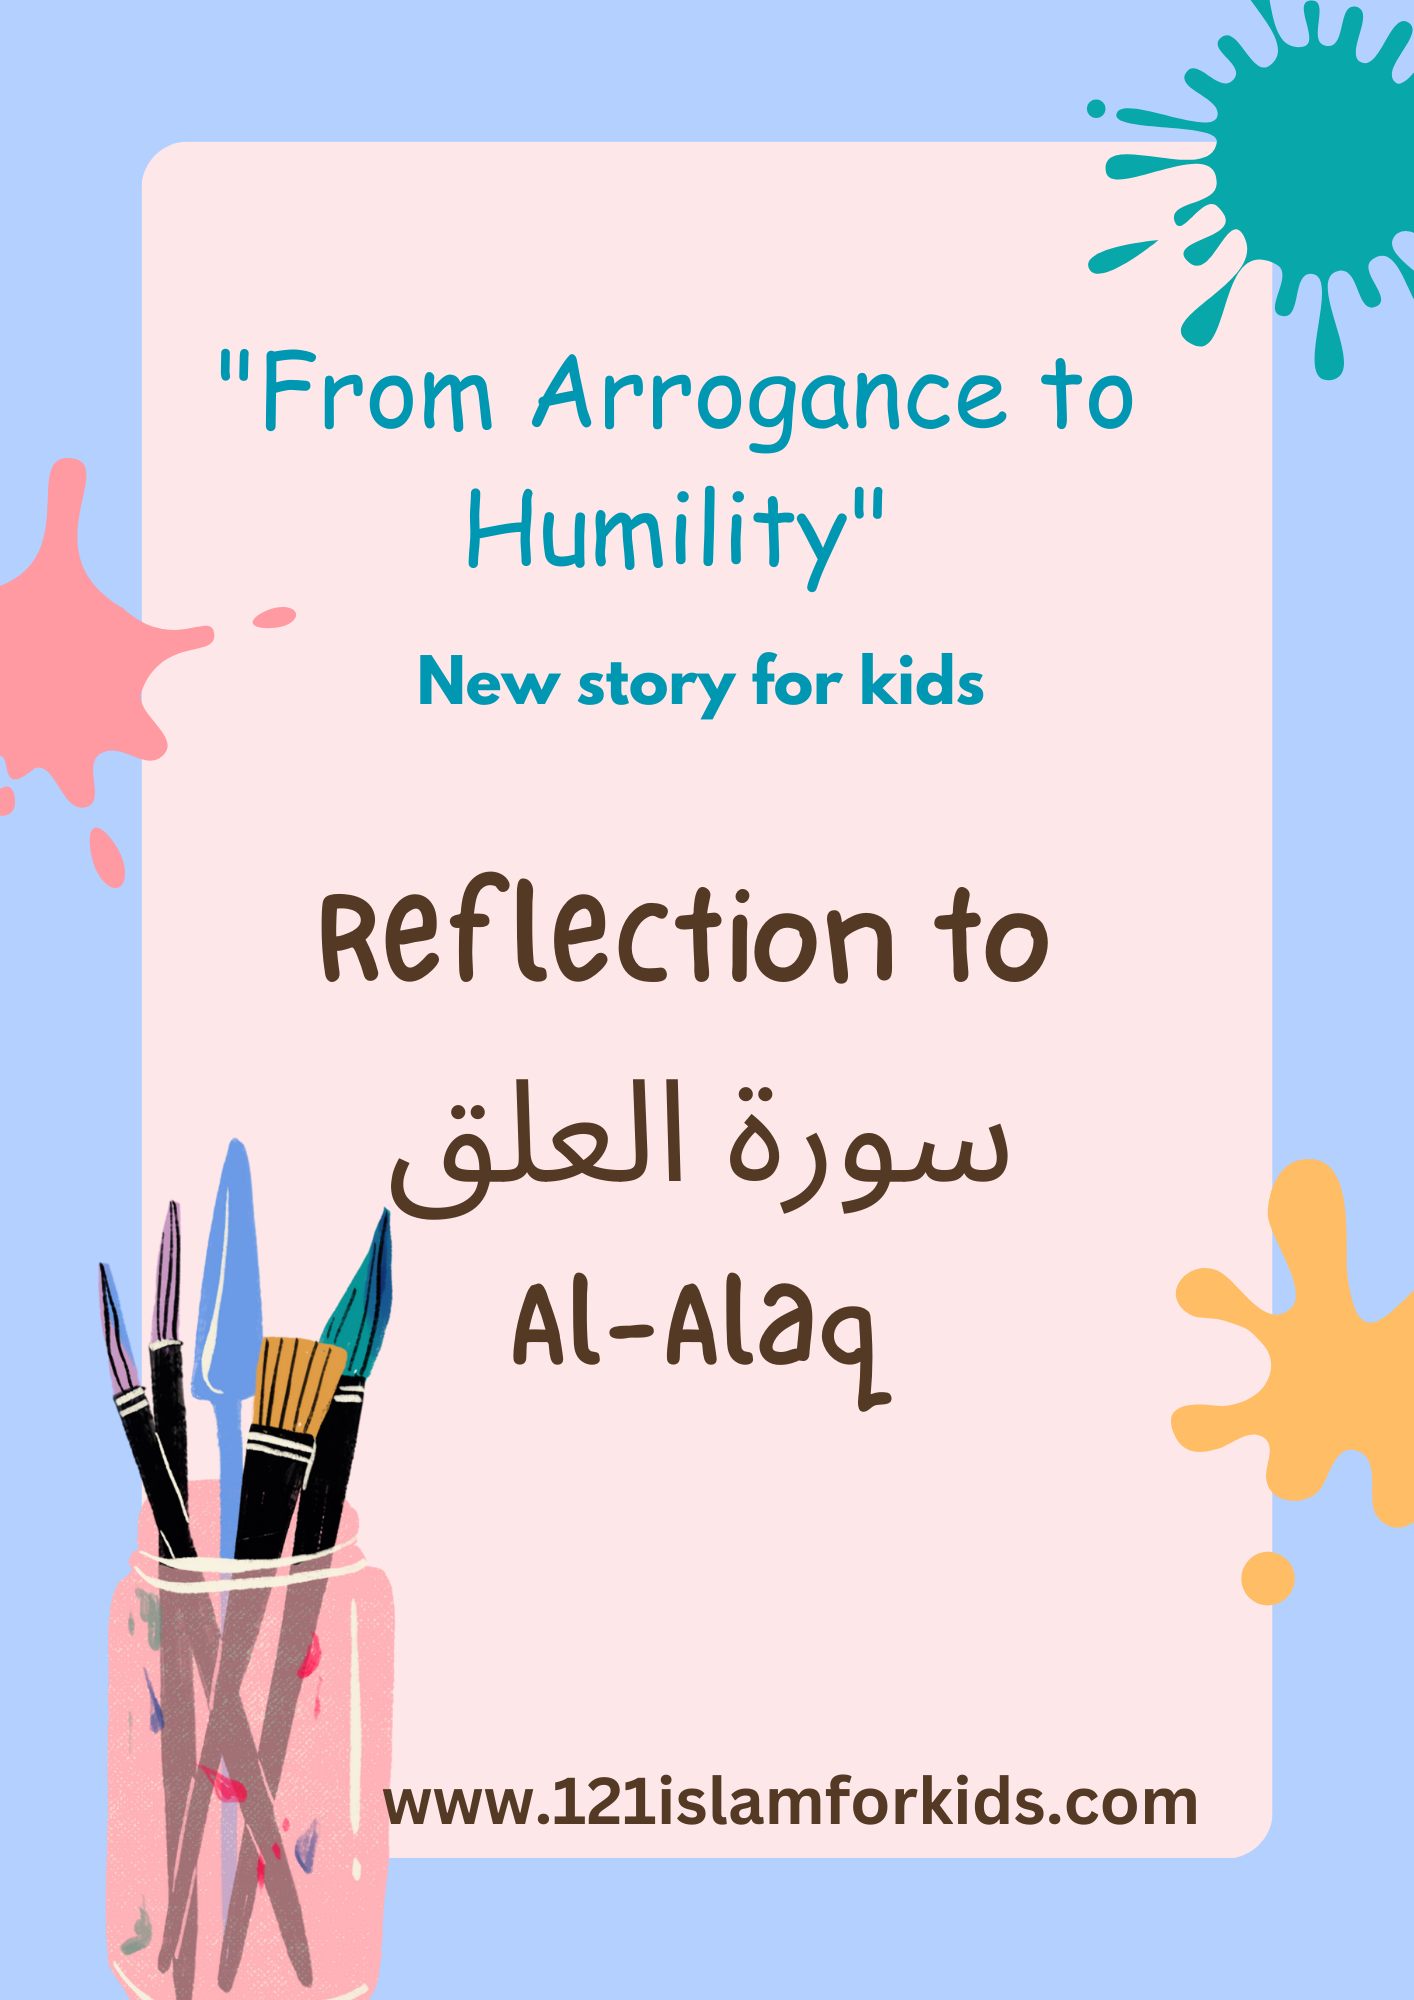 “From Arrogance to Humility: The new story of Reflection to Surah Alaq